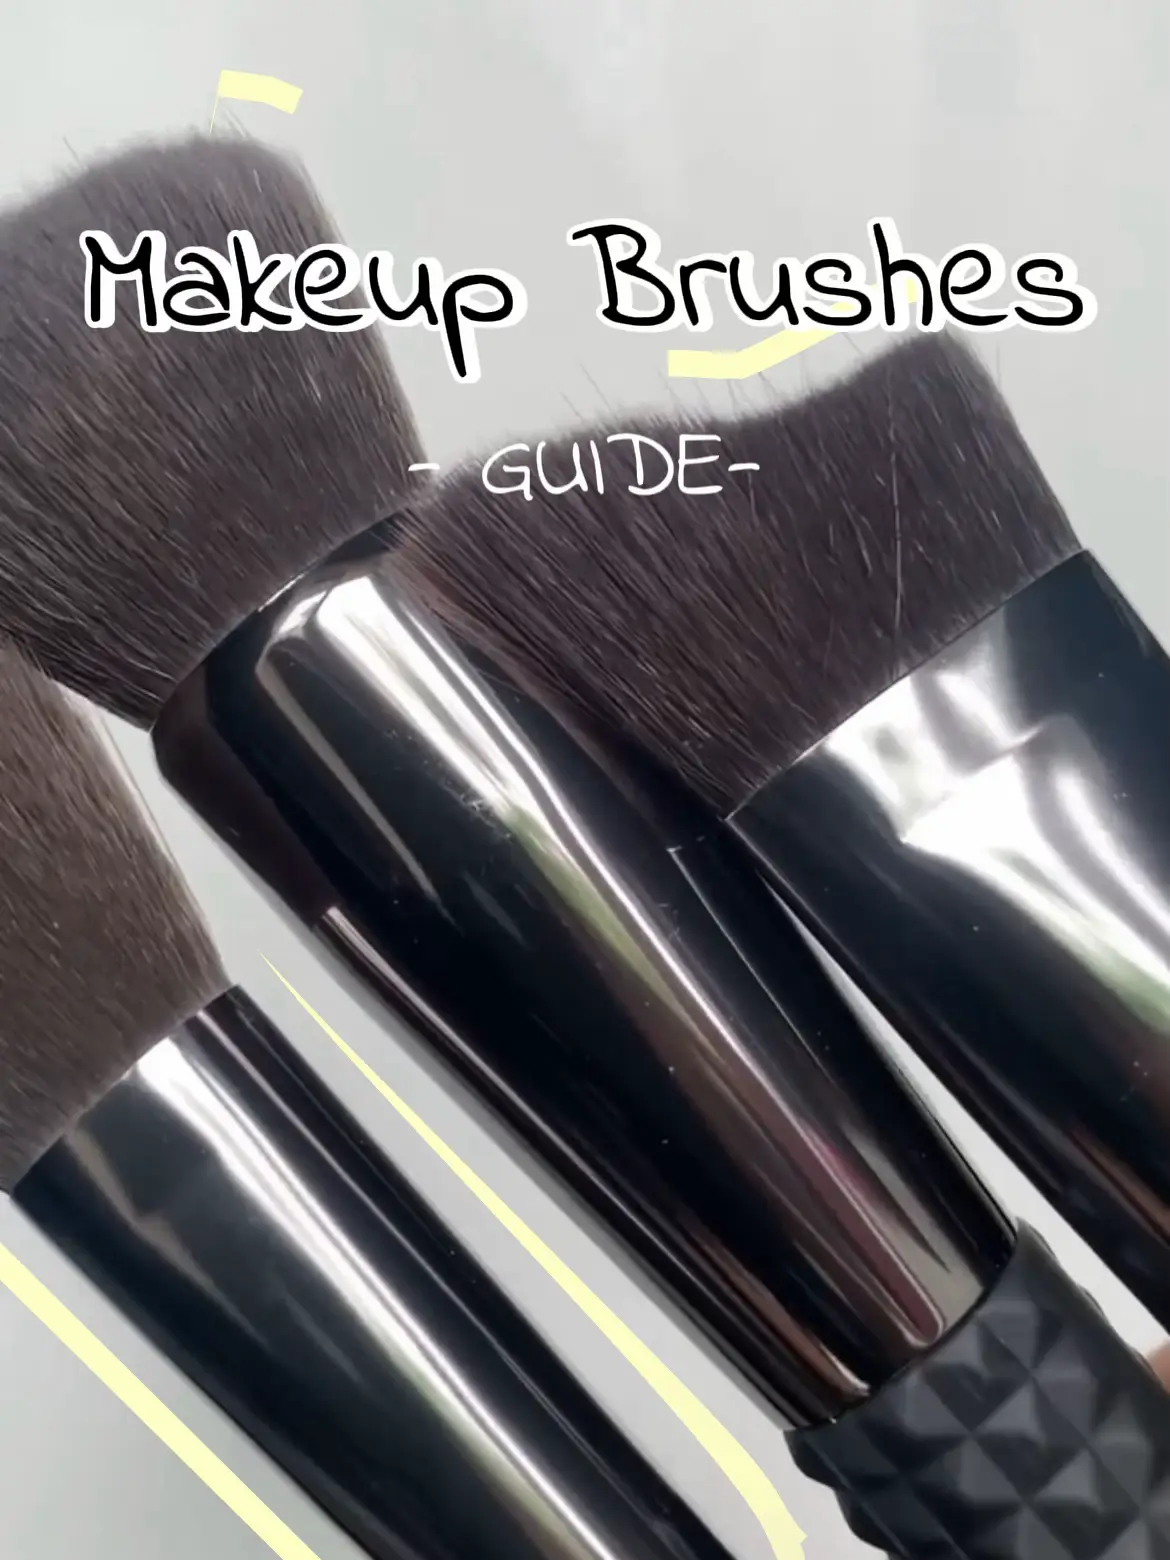 20 Top Makeup Brushes And Tools Guide